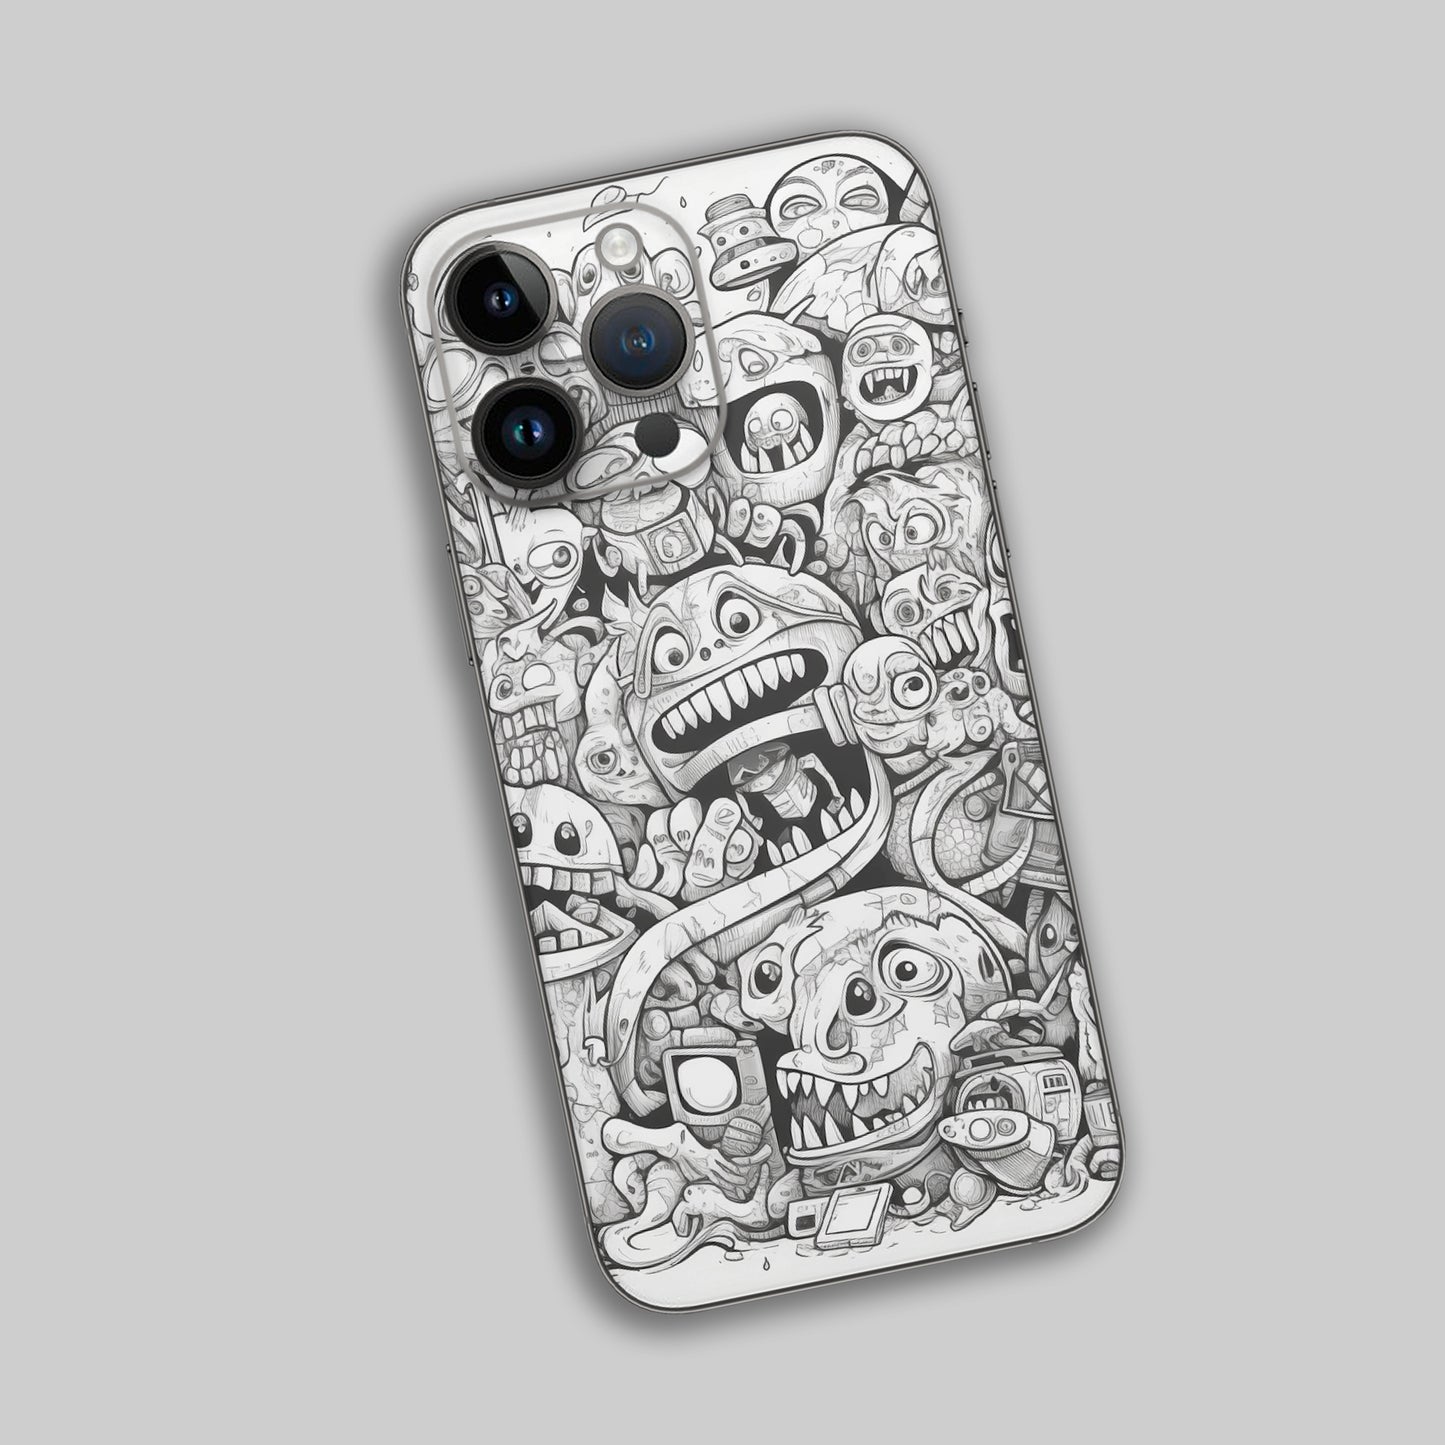 Monsters Doodle Mobile Skin - Monsters Doodle Cover - Wrapie